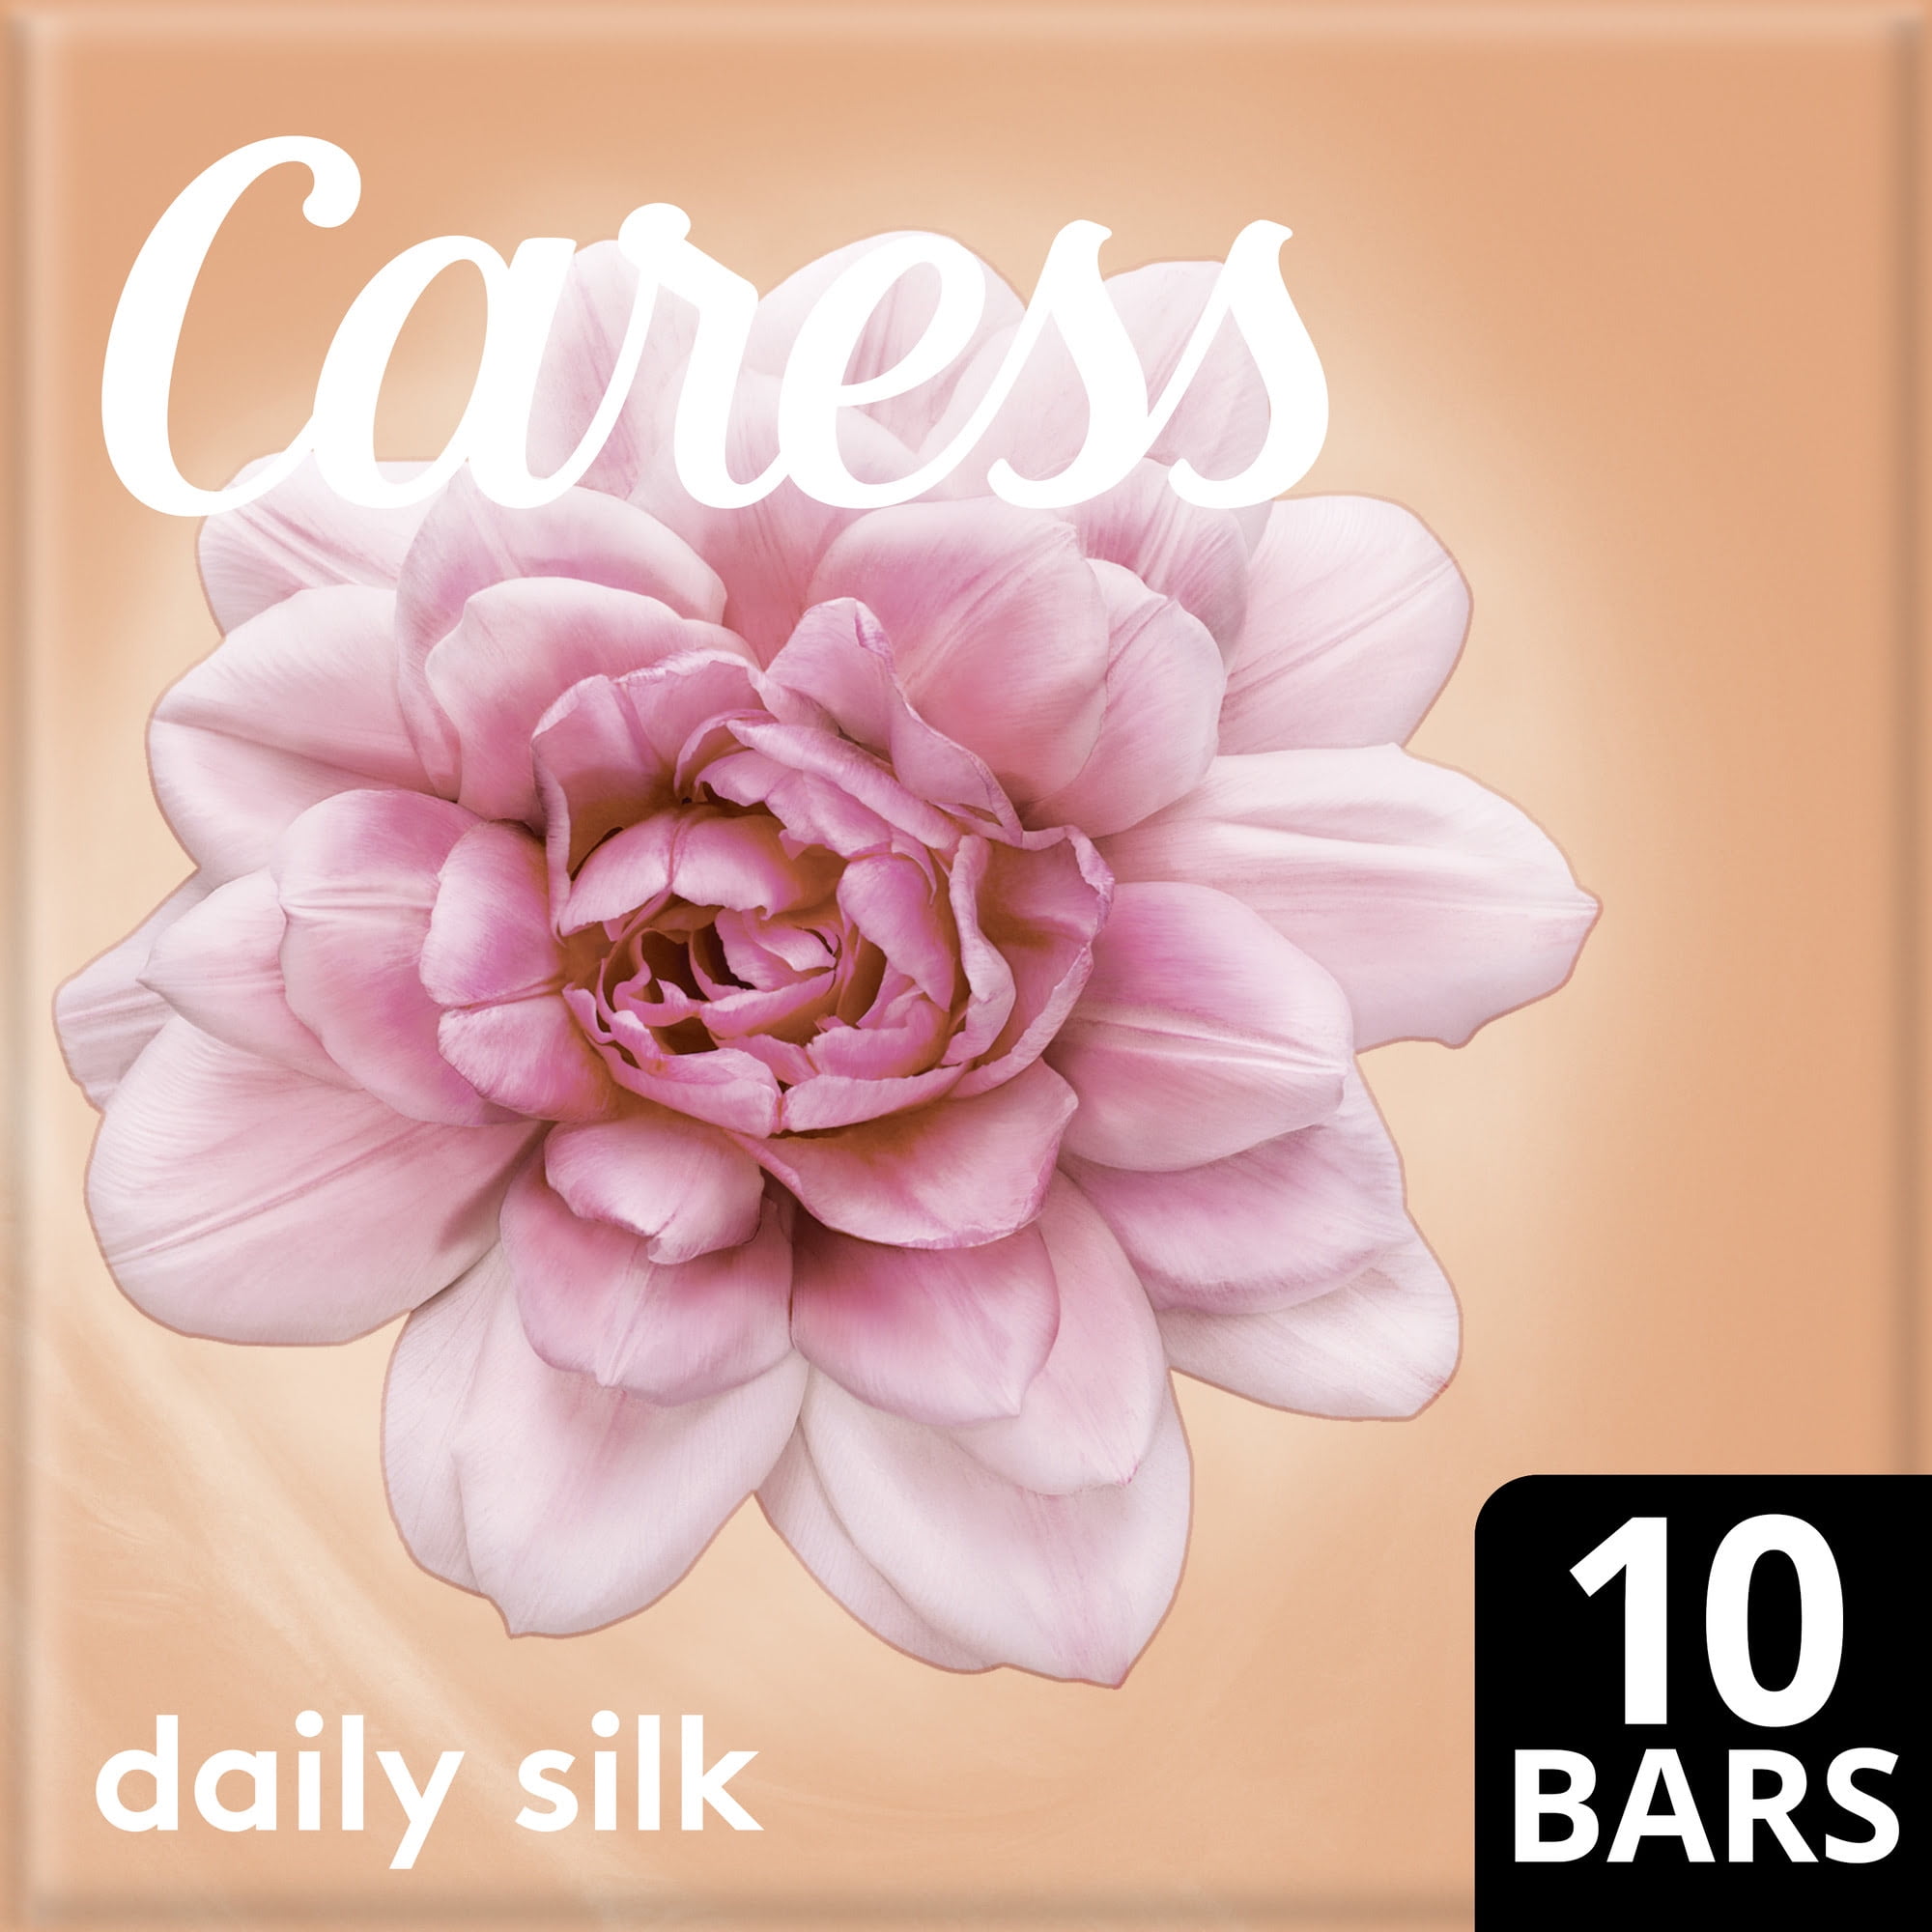 Caress Bath And Body Daily Silk Body Soap With Silk Extract & Floral Oil Essence For Soft Skin 3.75 oz, Bars - Walmart.com